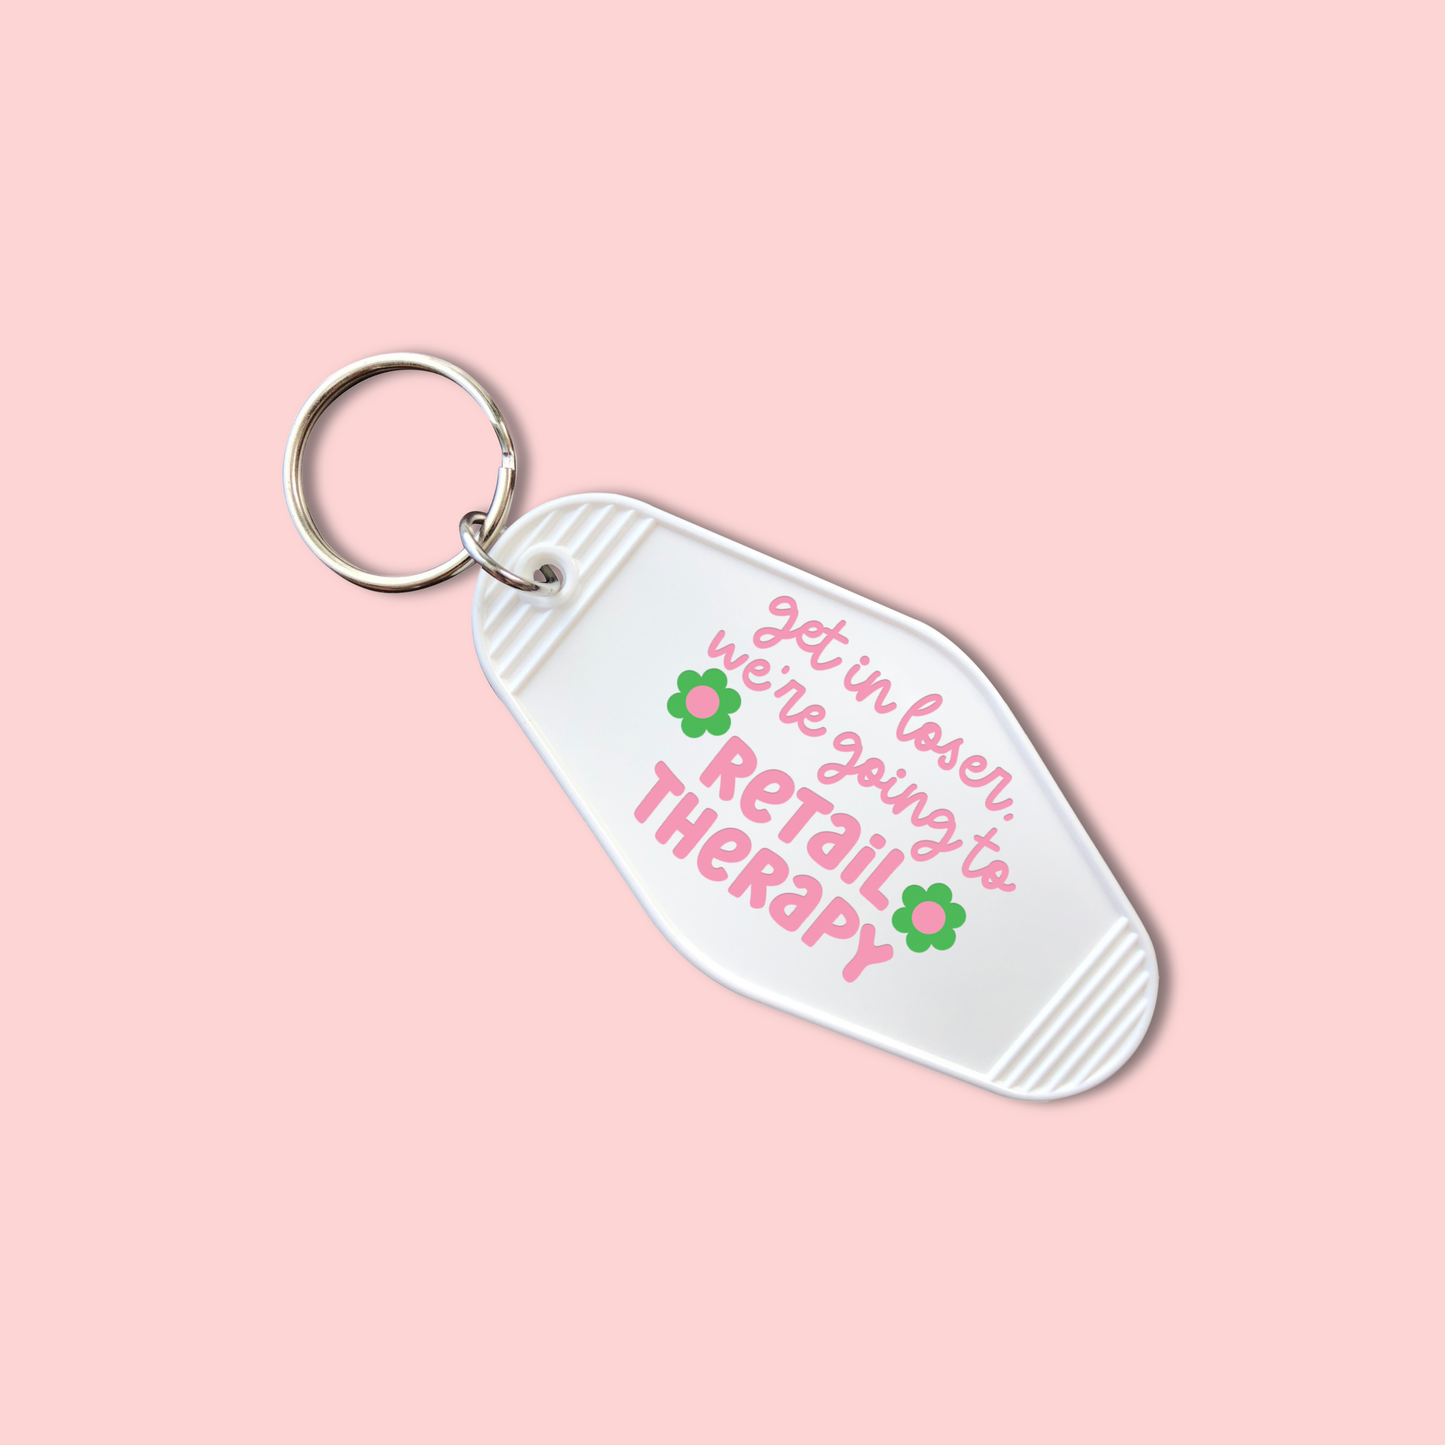 Get In, We Are Going Retail Therapy (Set of 5) -  Keychain UV DTF Decal